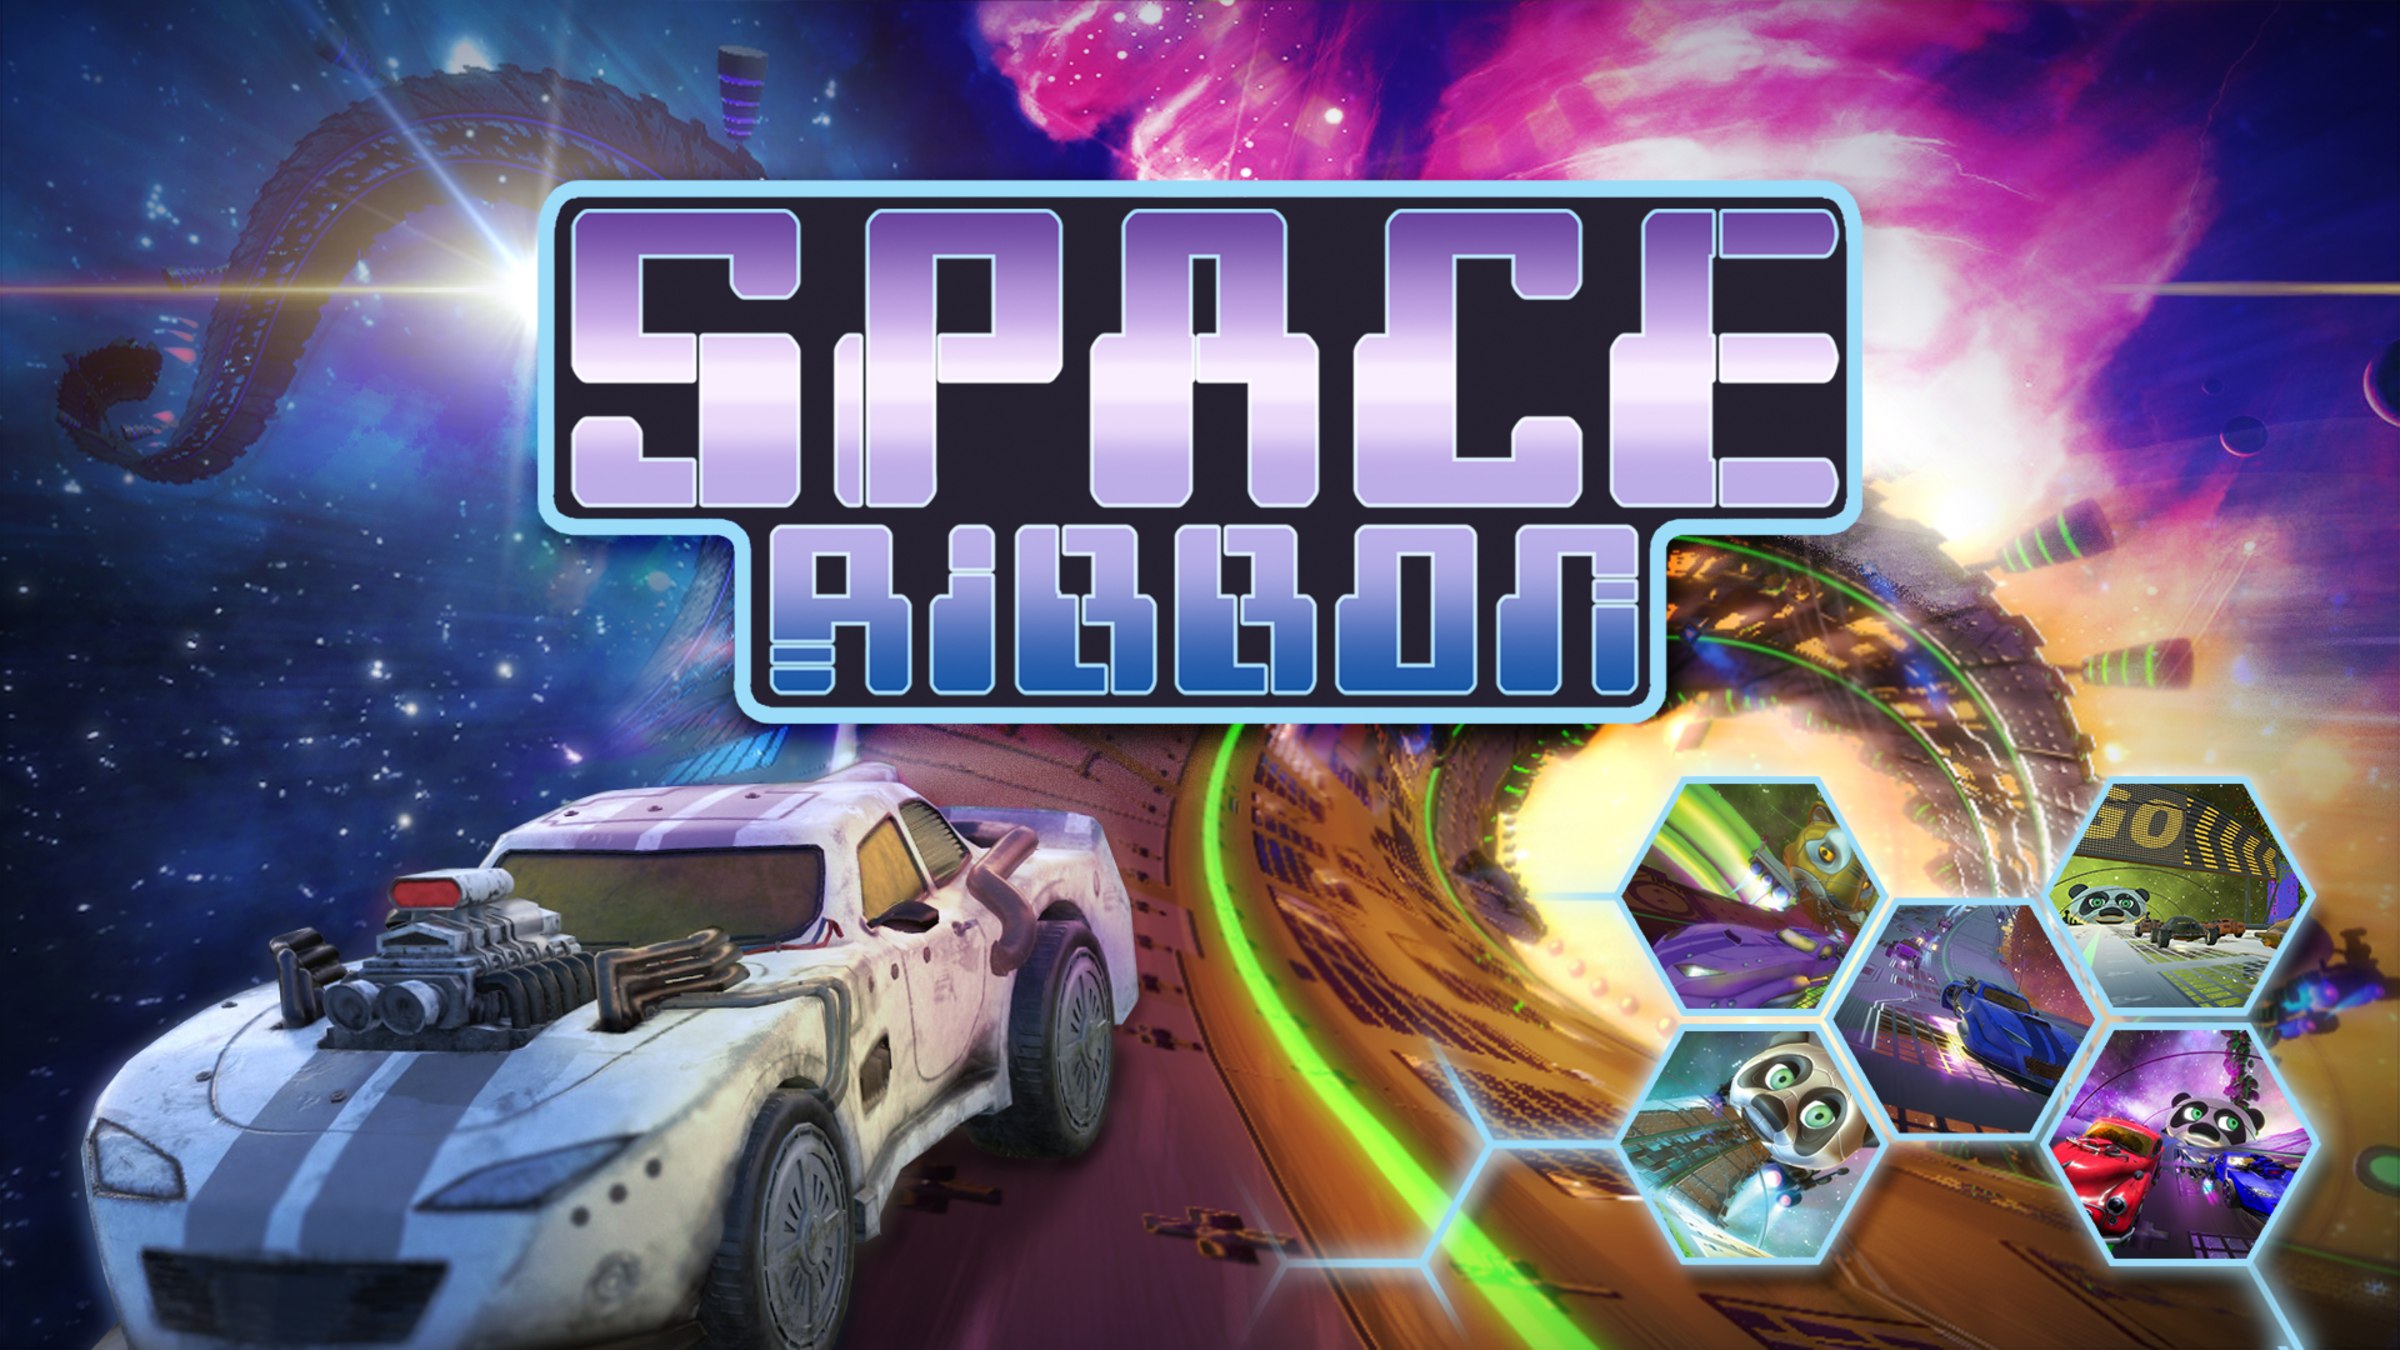 Space Ribbon for Nintendo Switch - Nintendo Official Site